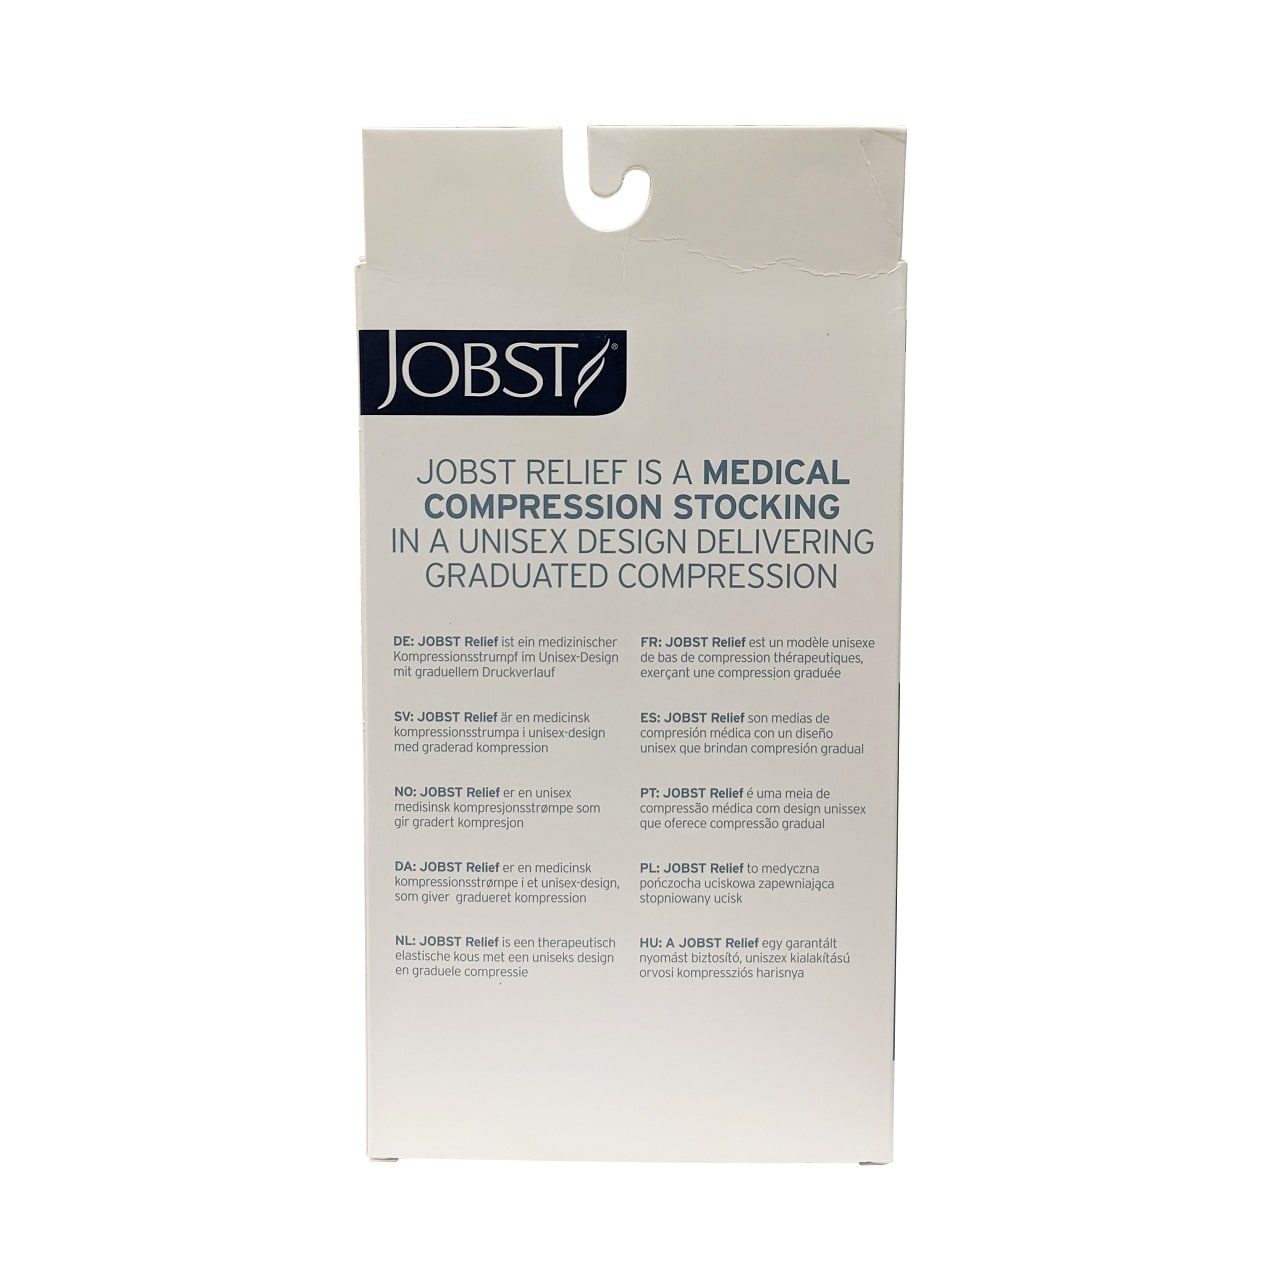 Description for Jobst Relief Compression Stockings 30-40 mmHg - Knee High / Open Toe / Beige (Large)